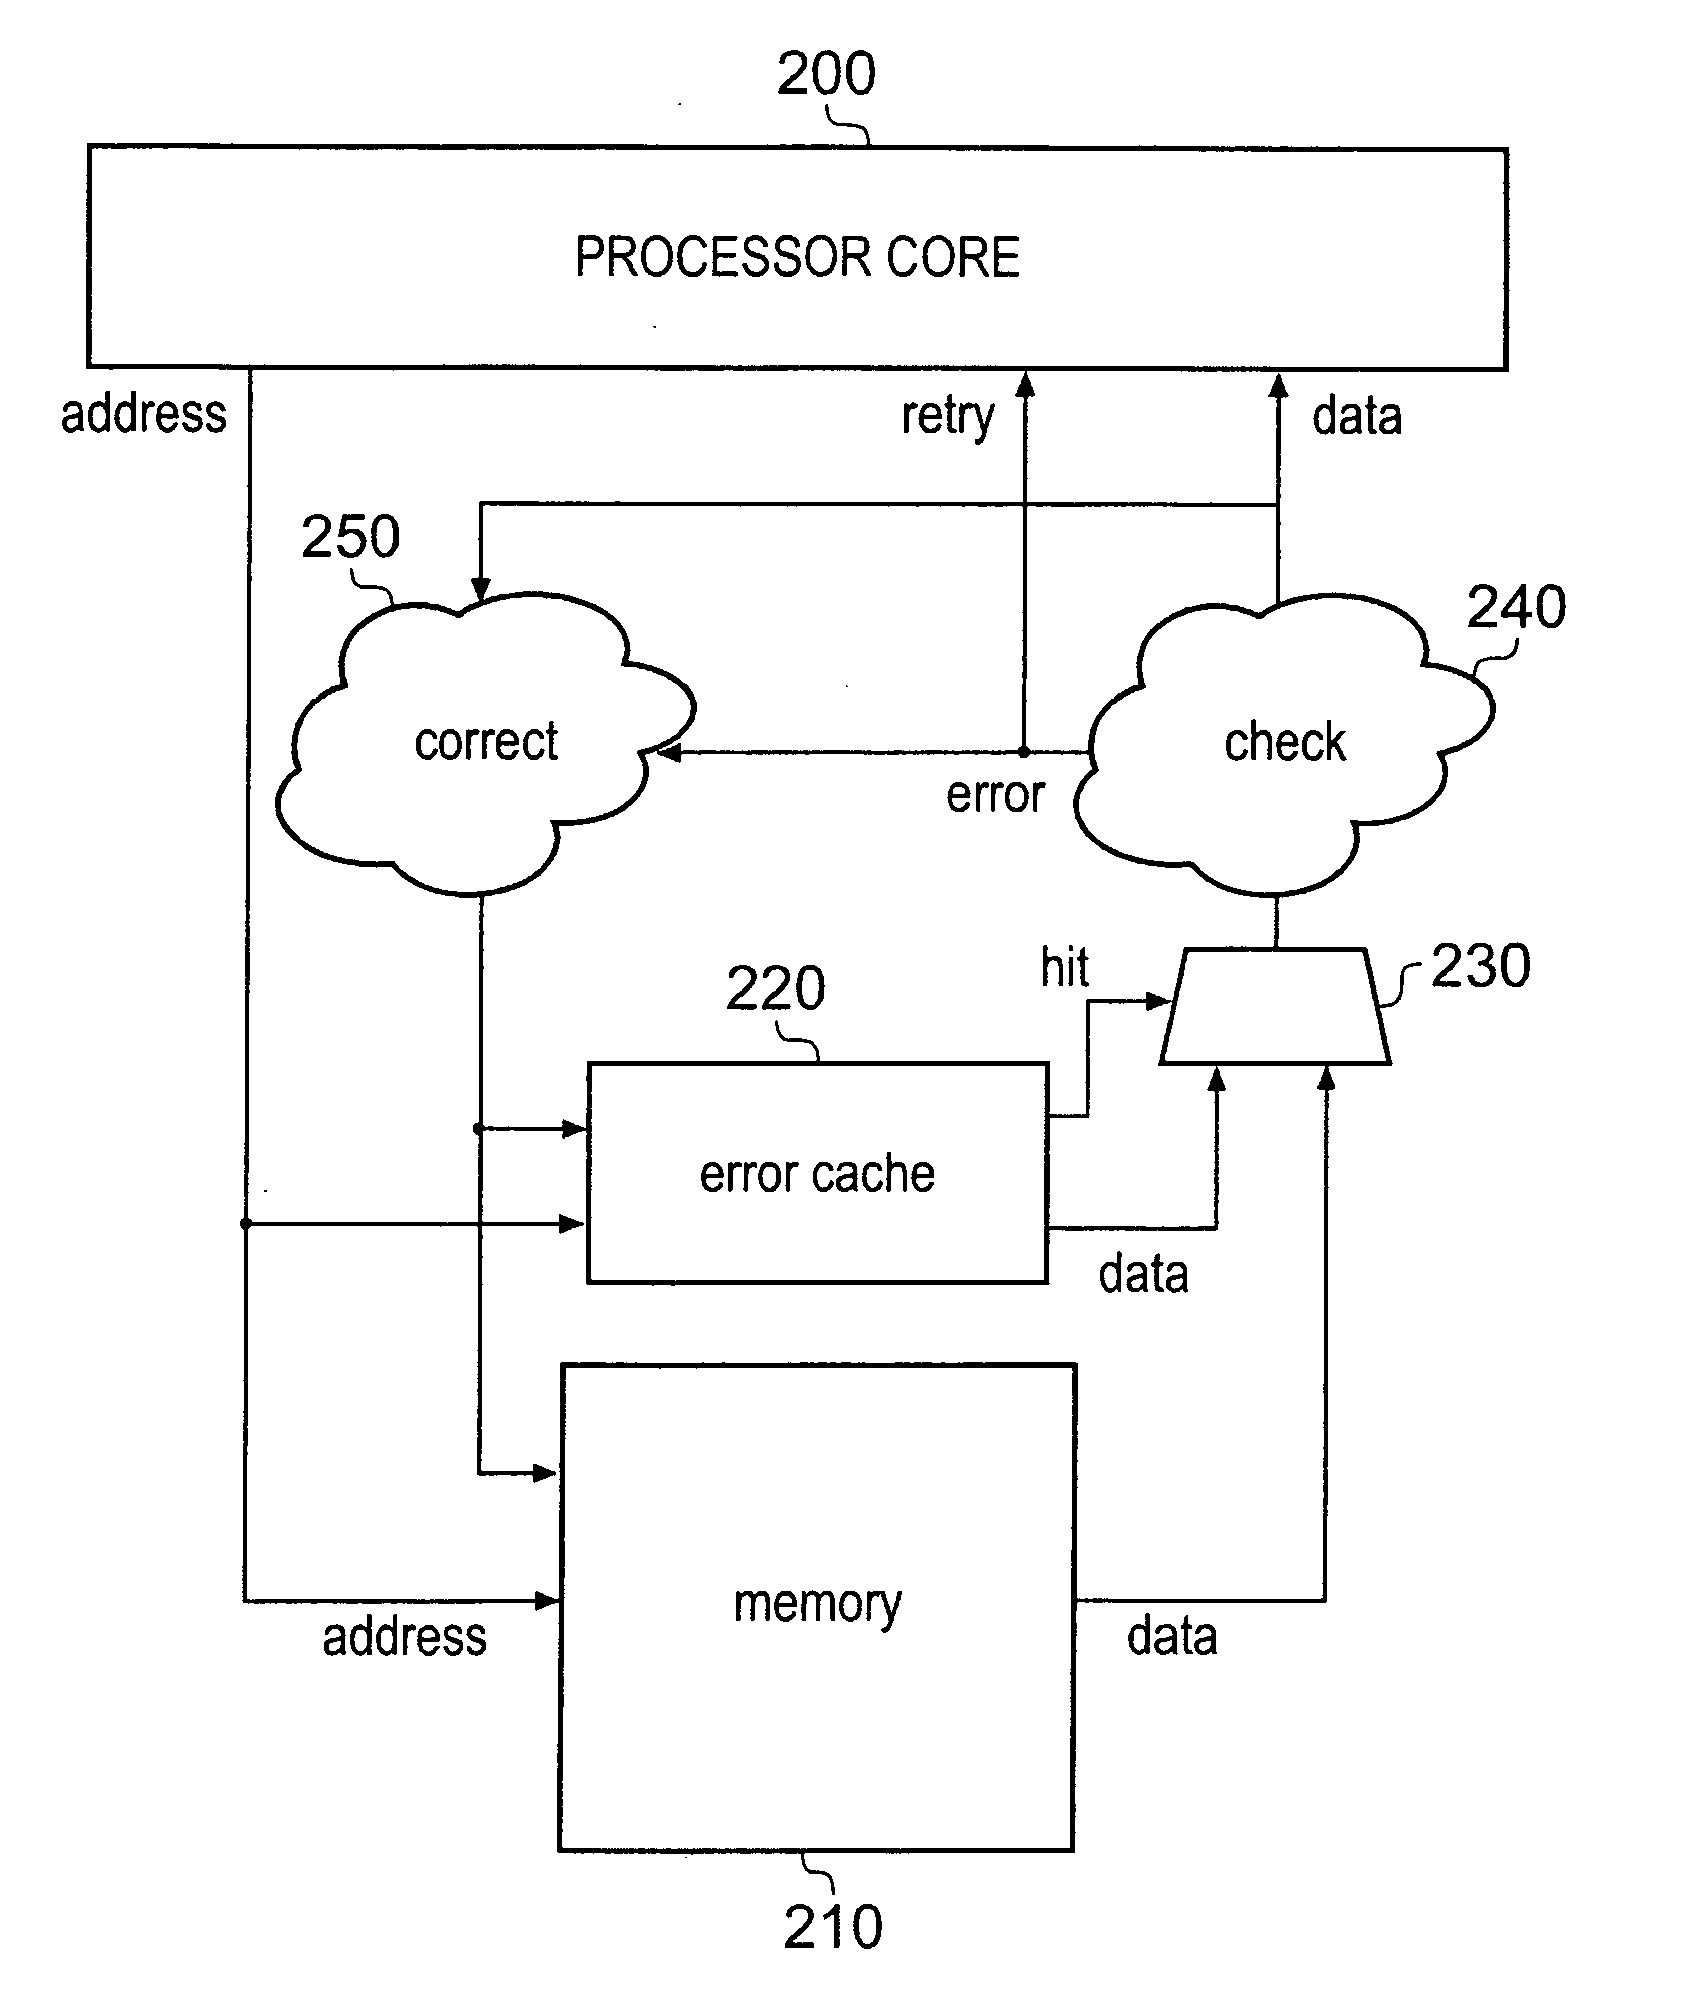 Apparatus and method for error correction of data values in a storage device